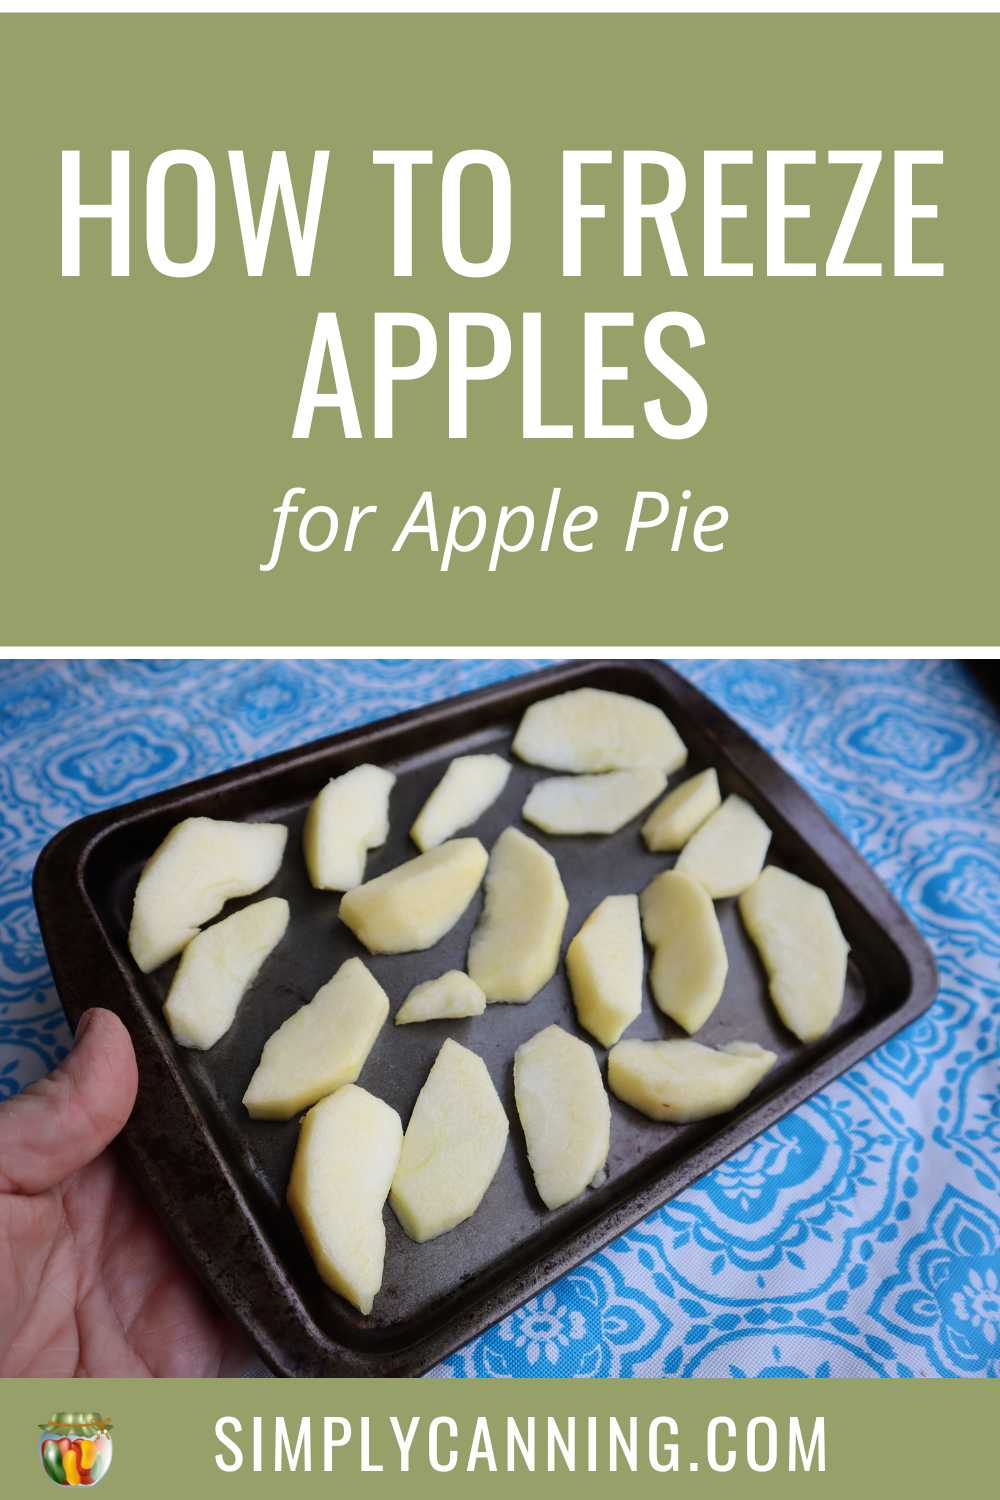 Freezing apples can be done in many ways. SimplyCanning.com shares tips and tricks for 3 different ways that you can preserve your apples in the freezer for easy use later. #SimplyCanning #FreezingApples #Apples